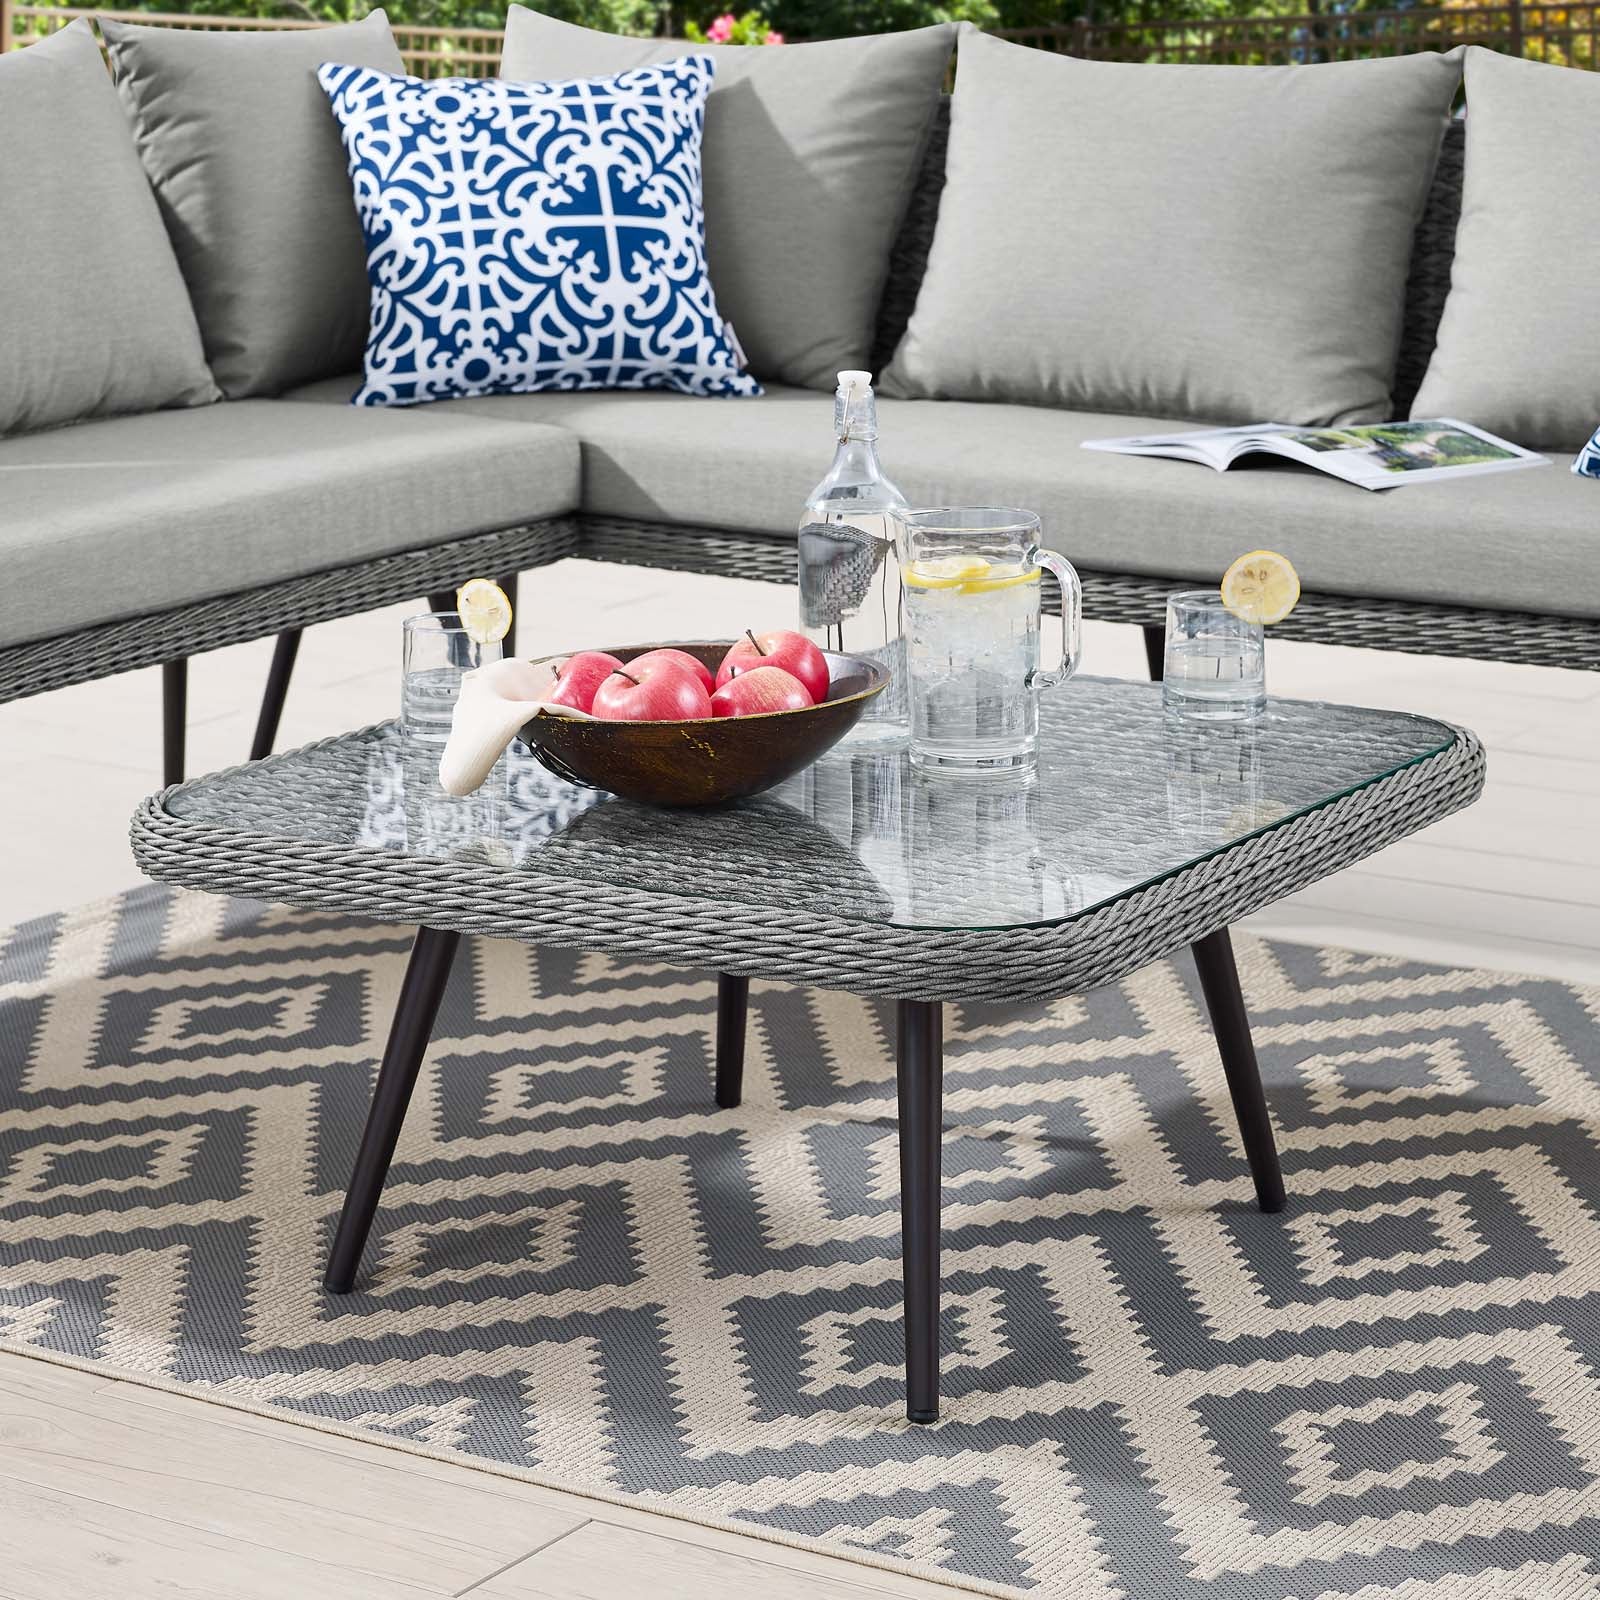 Modway Outdoor Coffee Tables - Endeavor Outdoor Patio Wicker Rattan Square Coffee Table Gray